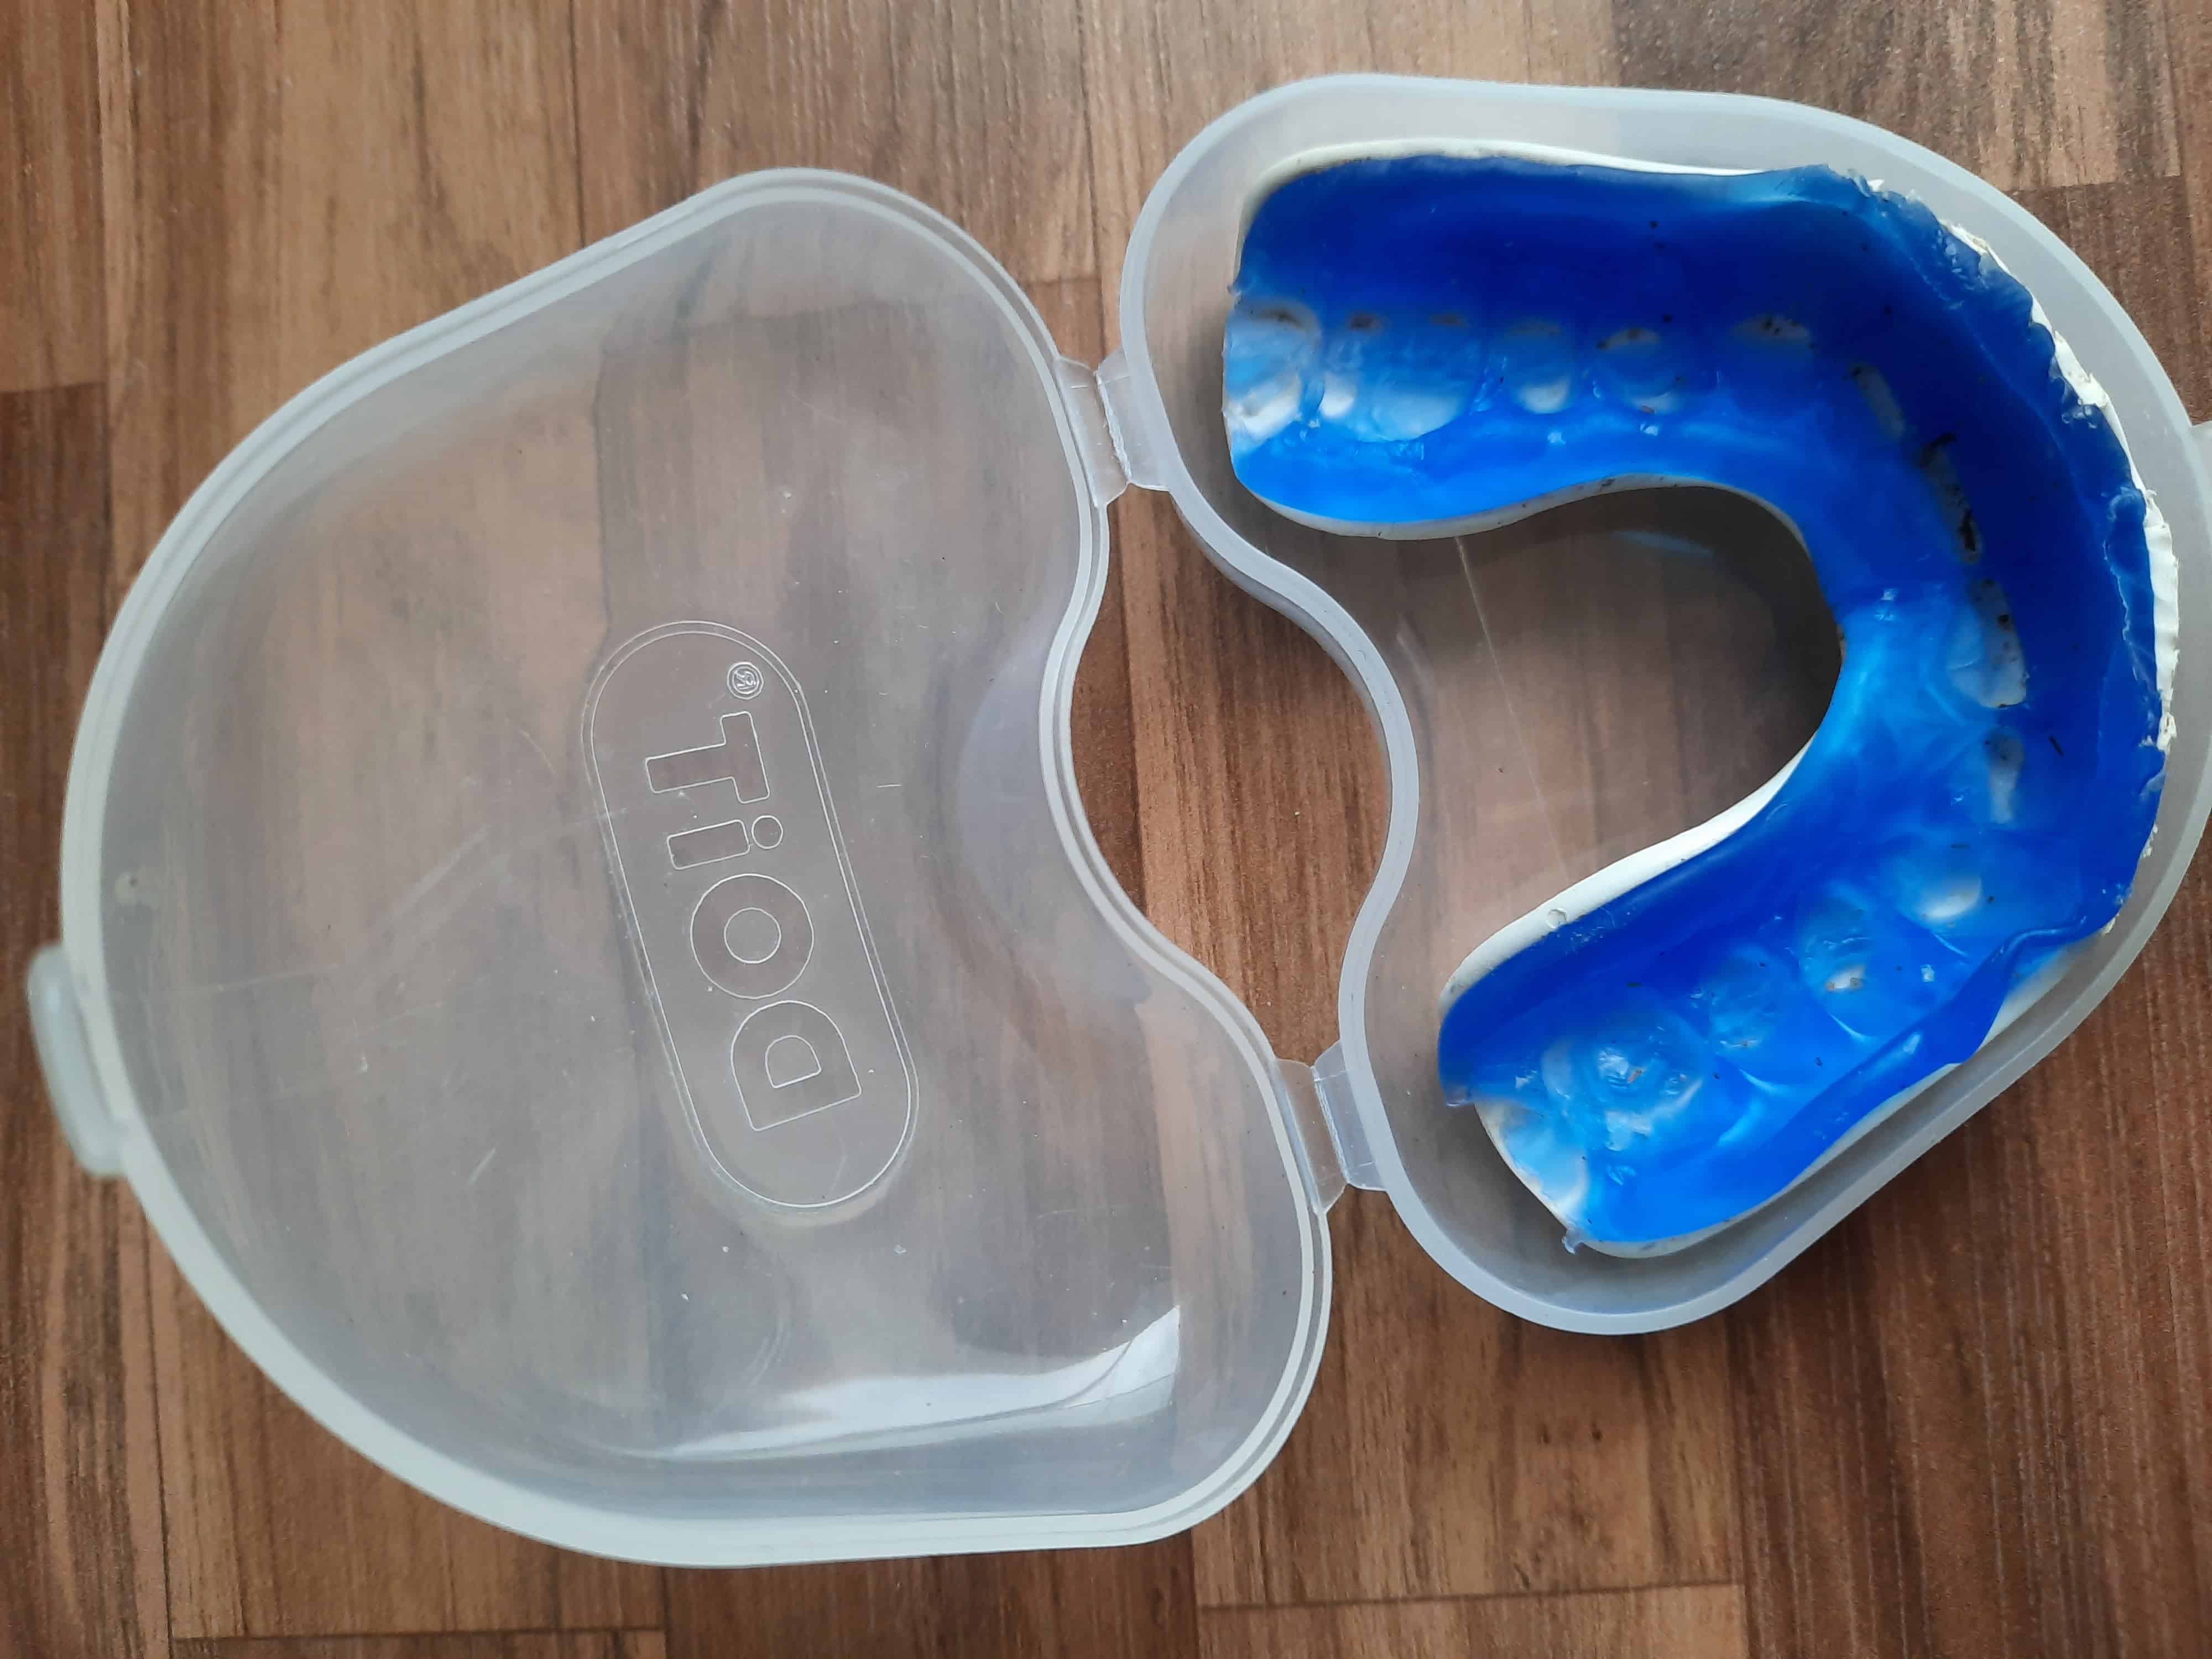 Rugby mouthguards compulsory